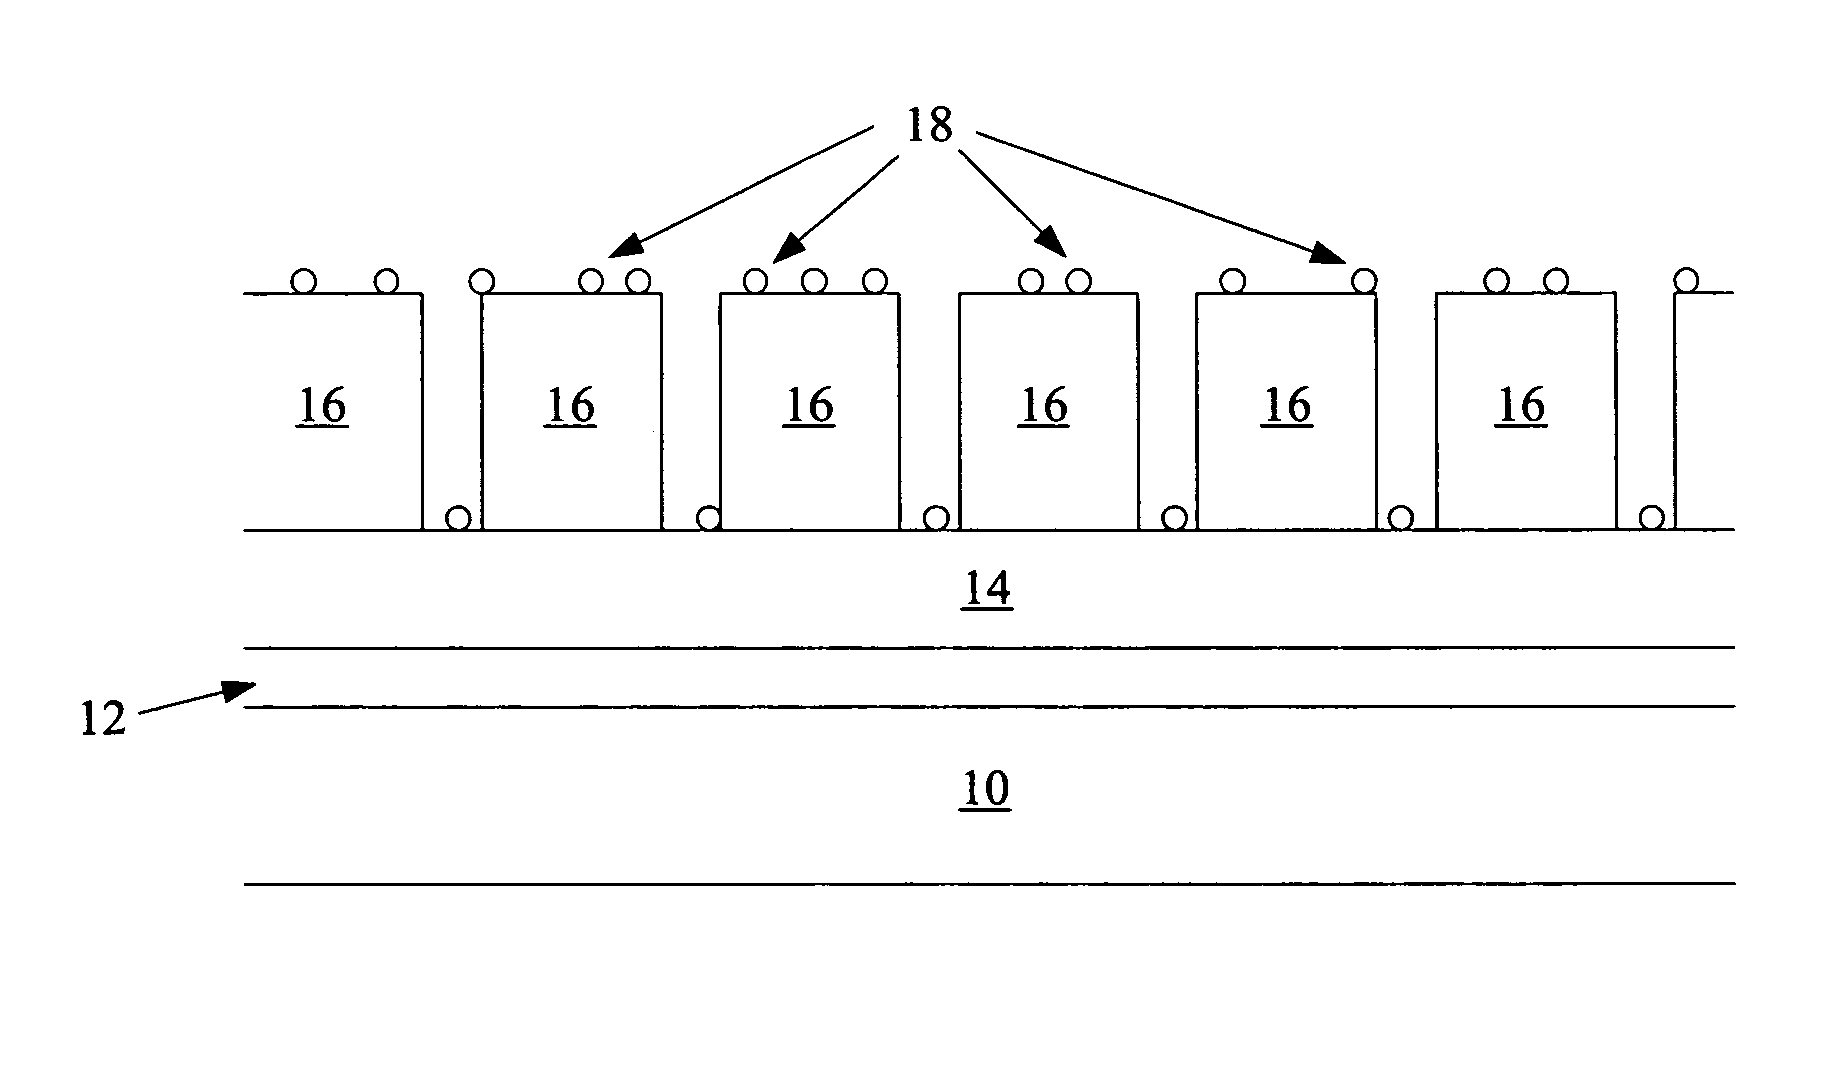 Uniform seeding to control grain and defect density of crystallized silicon for use in sub-micron thin film transistors